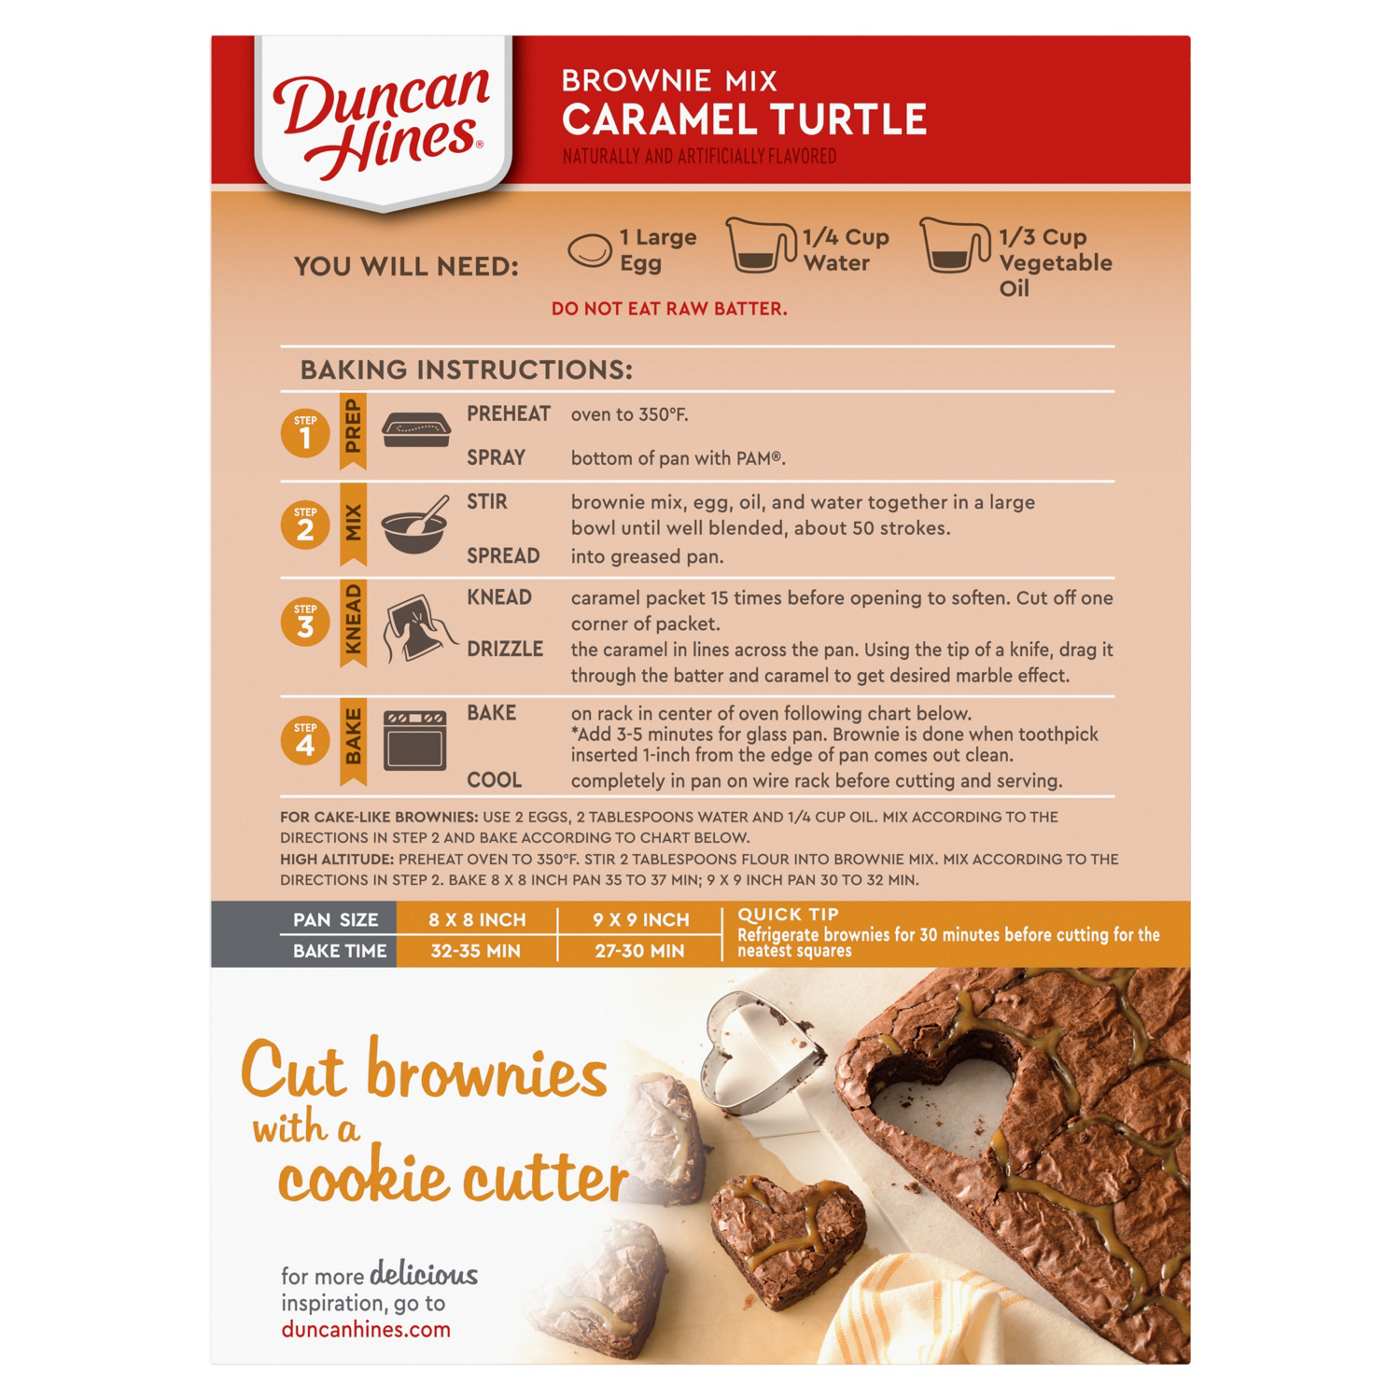 Duncan Hines Signature Caramel Turtle Brownie Mix; image 2 of 7